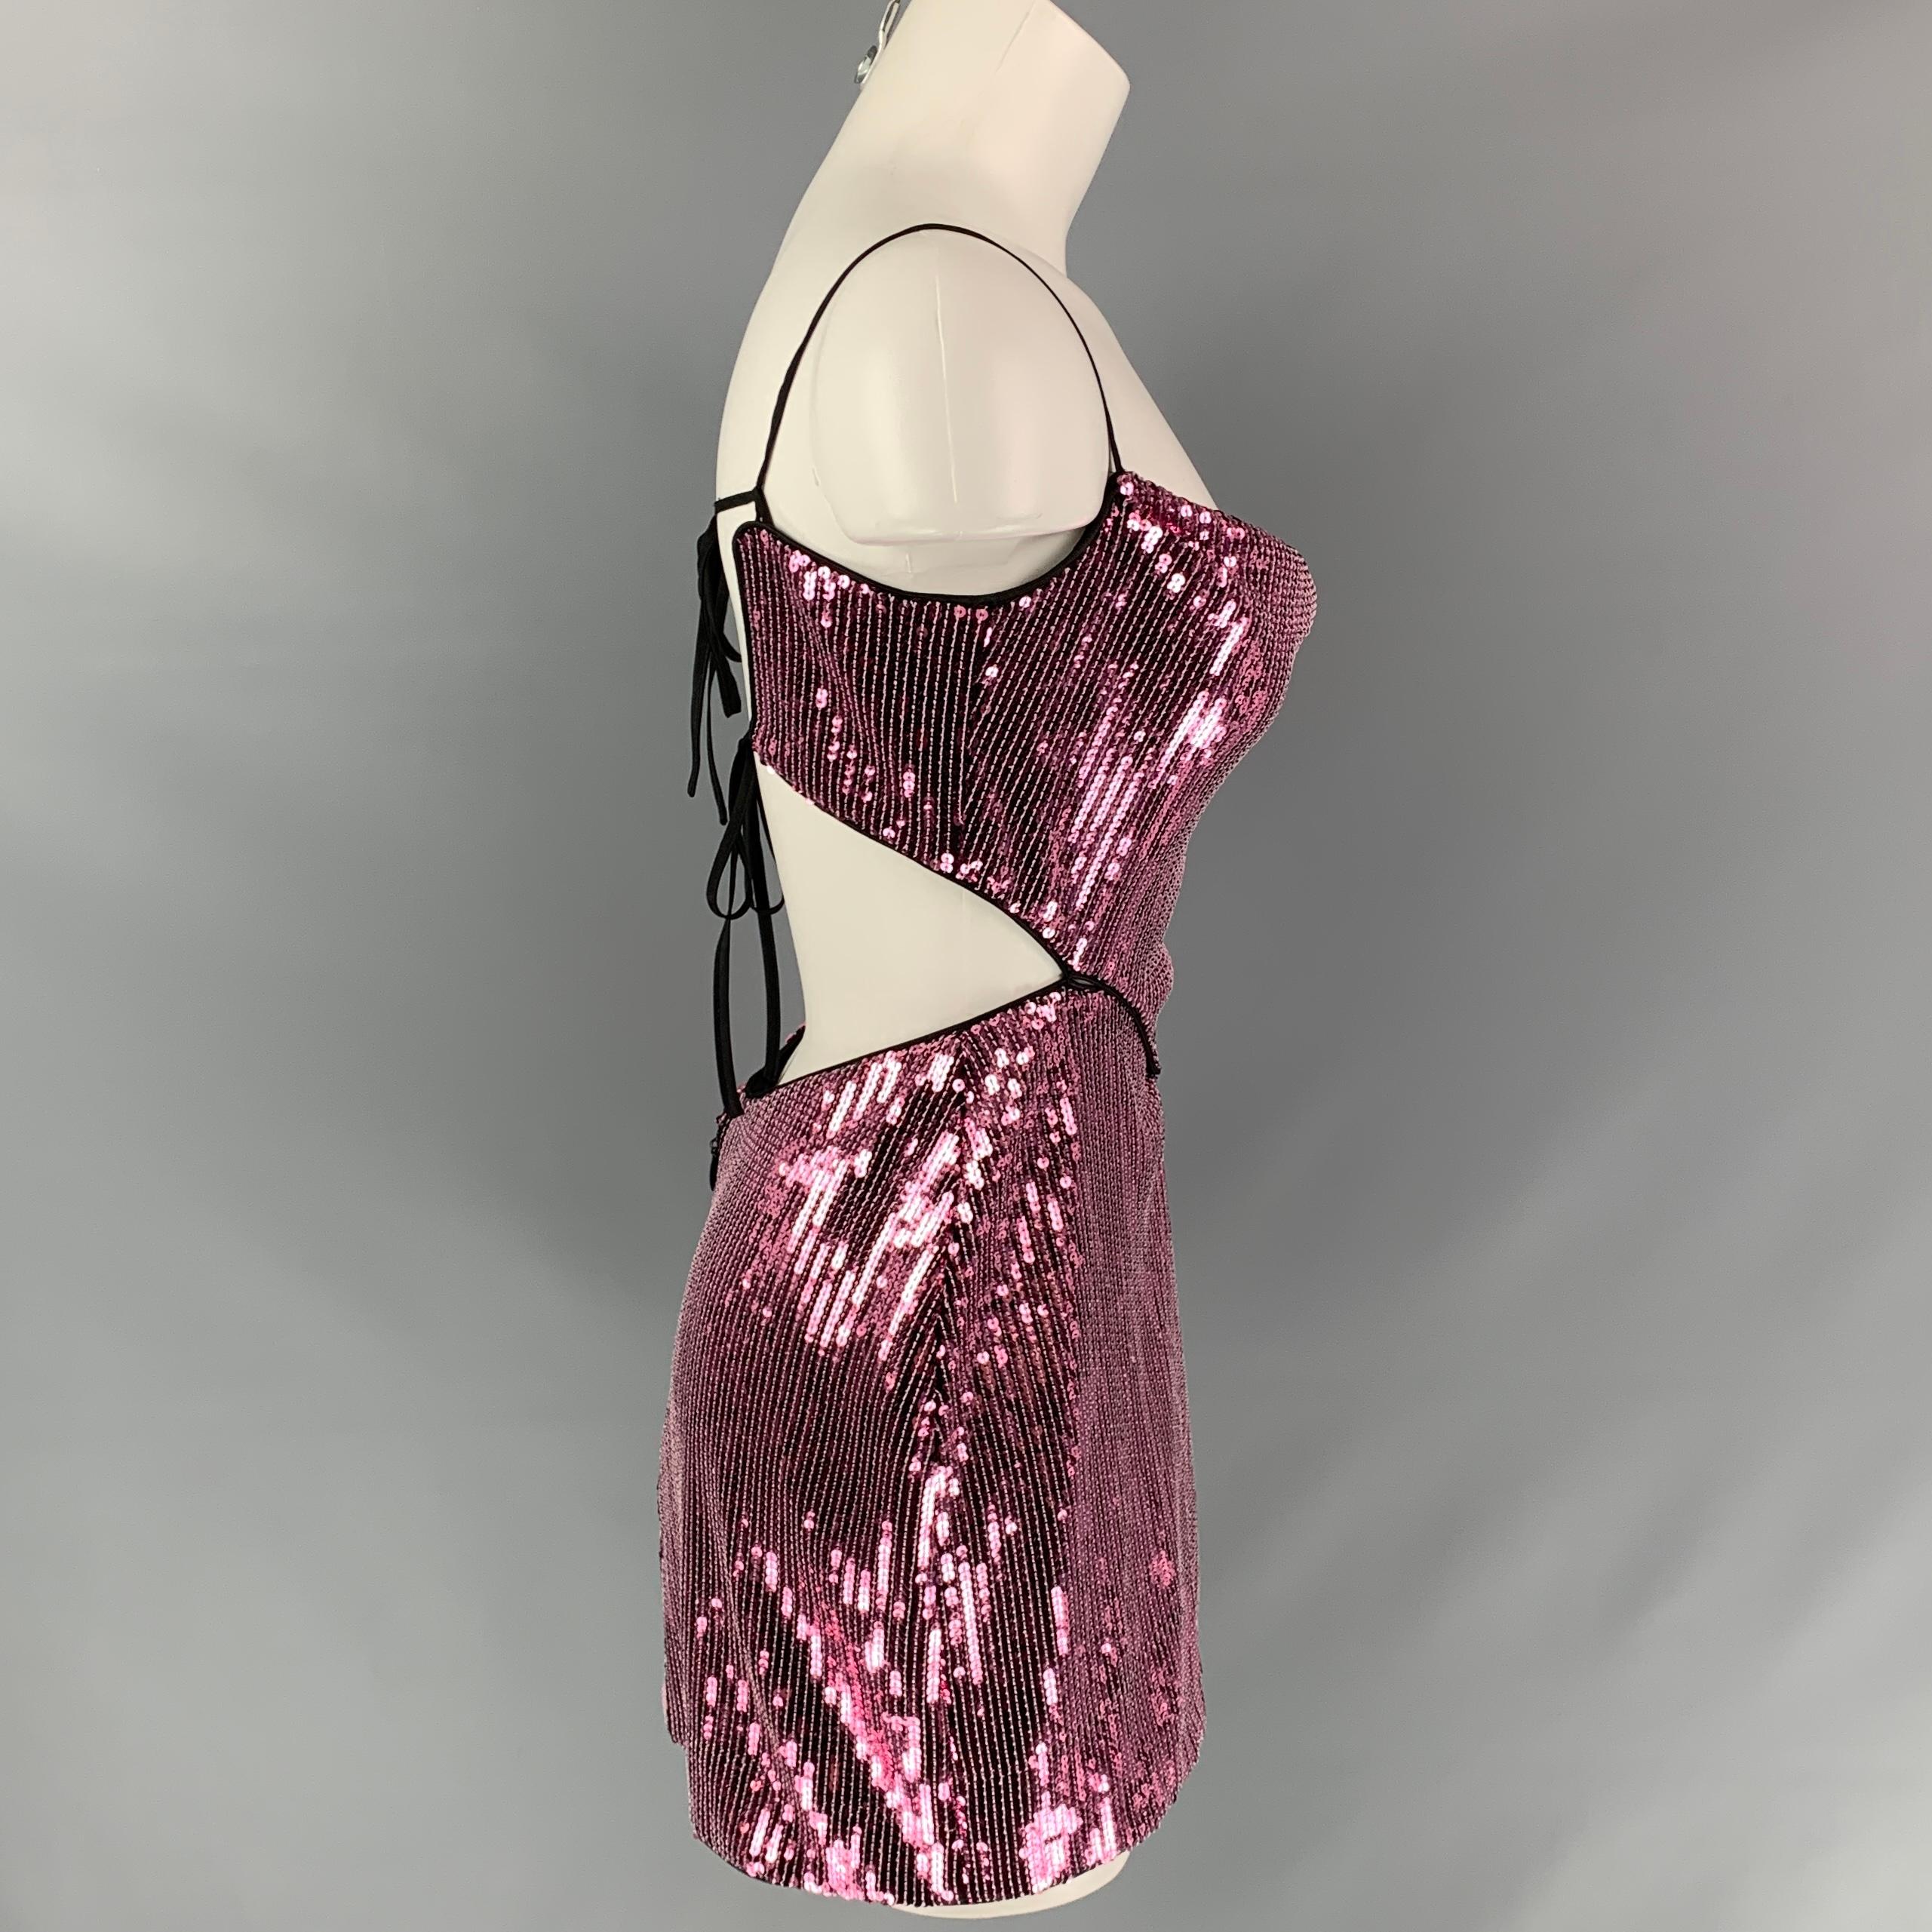 X by NBD dress comes in a pink polyester / silk with a slip liner featuring a mini style, side cut out details, back zipper, and a double back strap closure. 

Very Good Pre-Owned Condition.
Marked: XS

Measurements:

Bust: 30 in.
Waist: 28 in.
Hip: